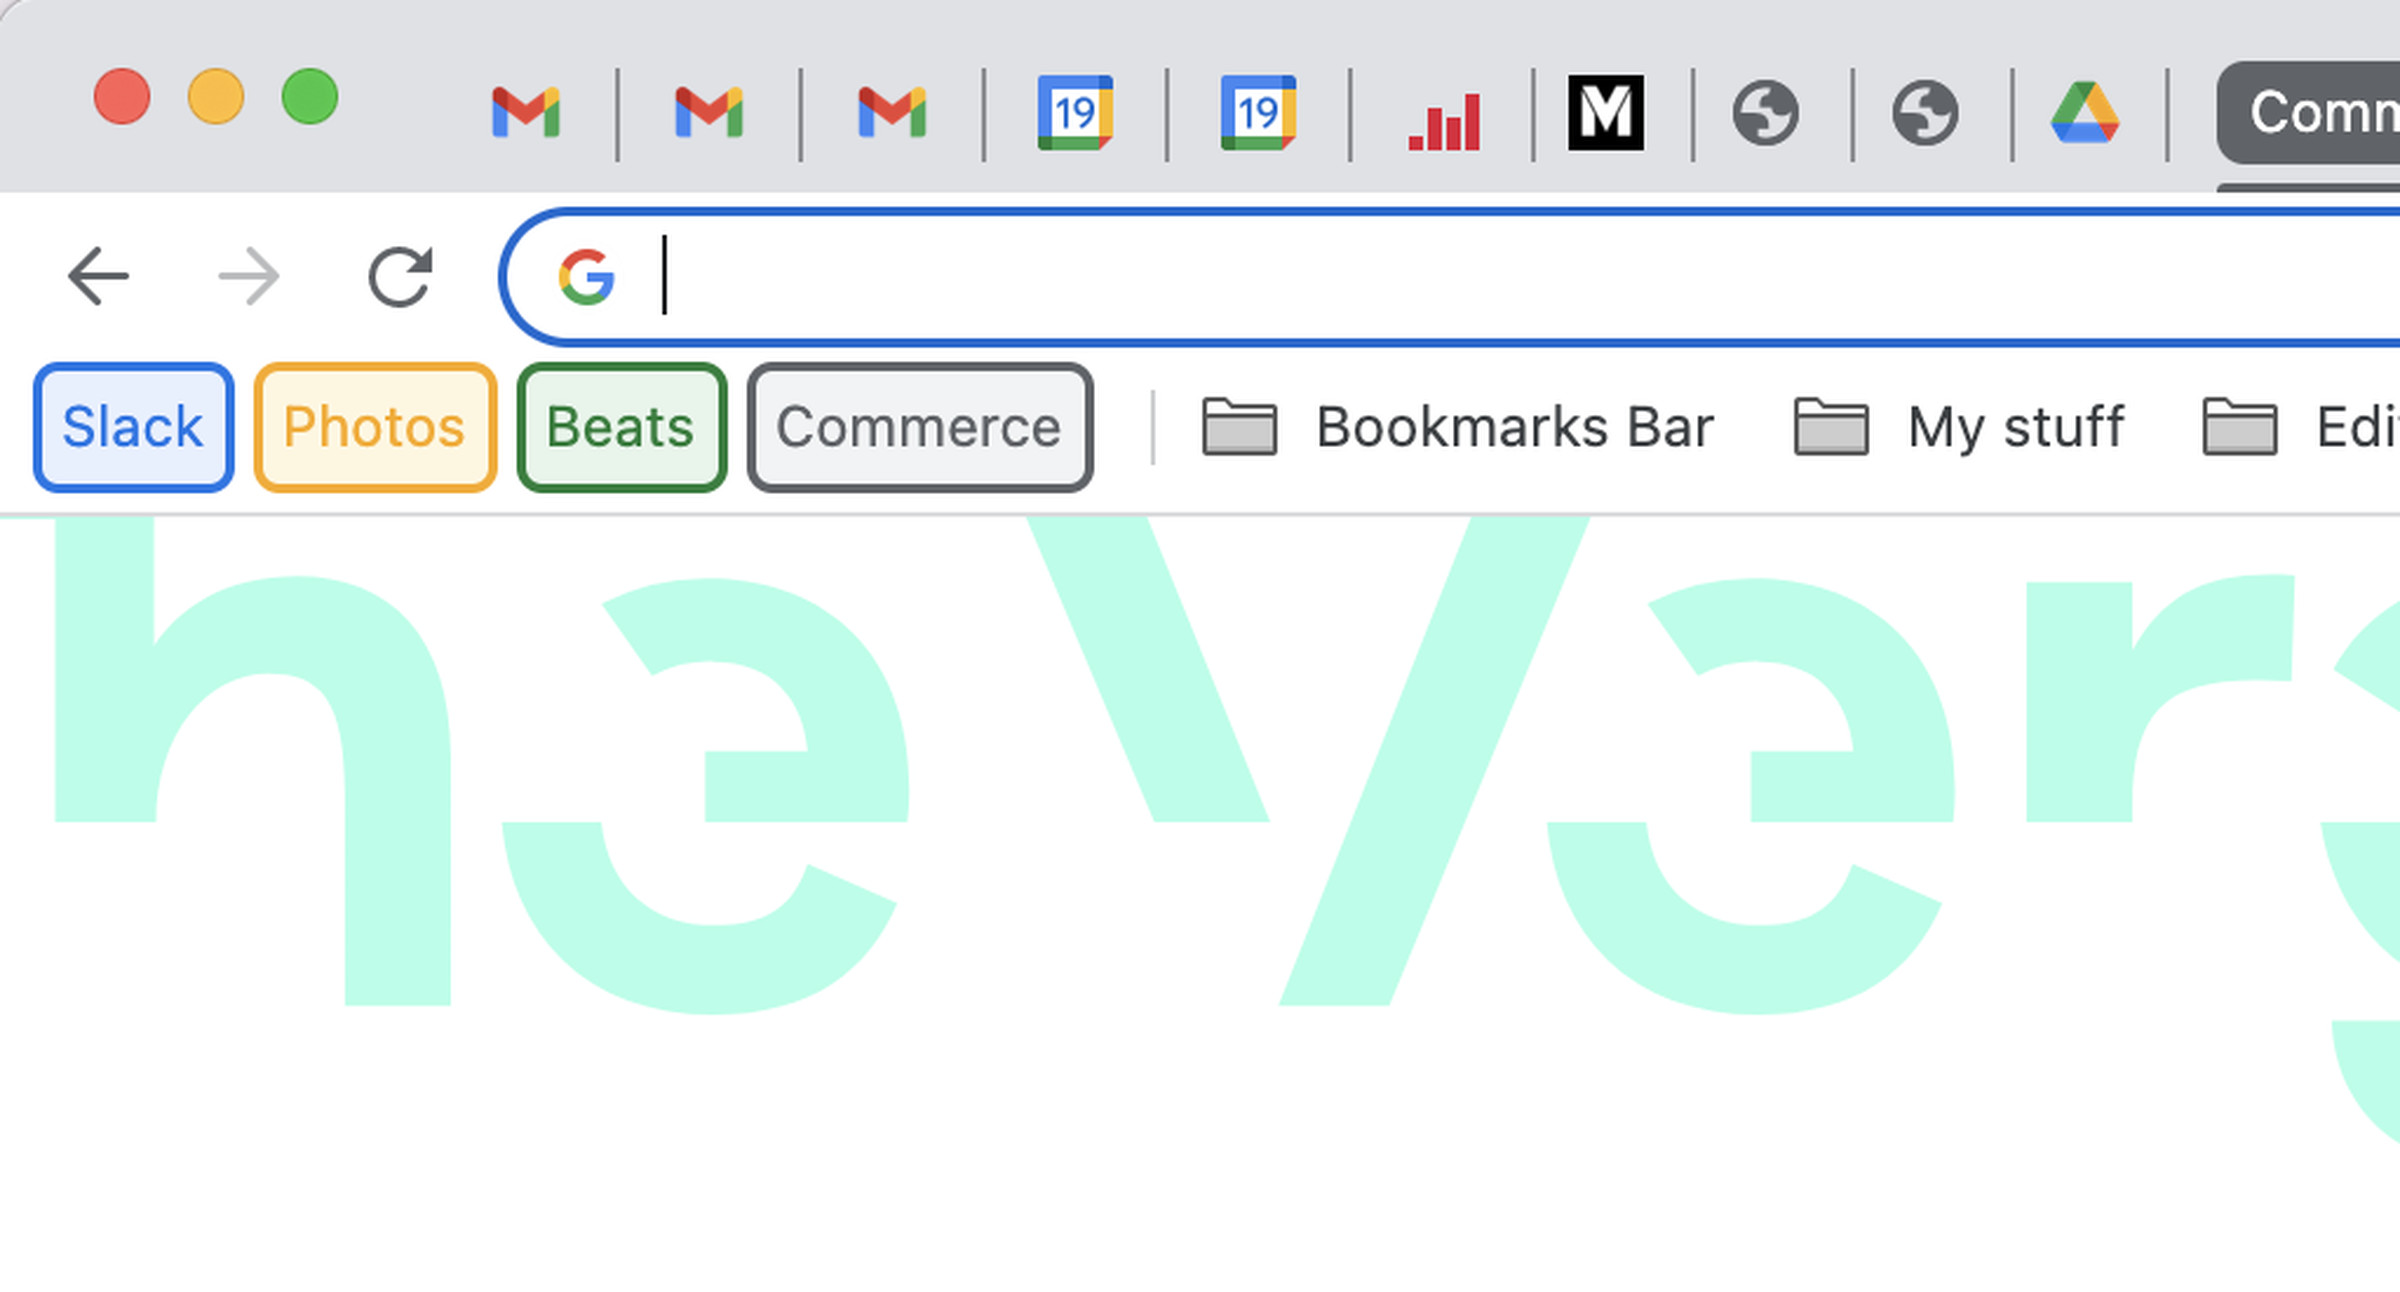 Chrome bookmarks bar with icons for tab groups on the left.